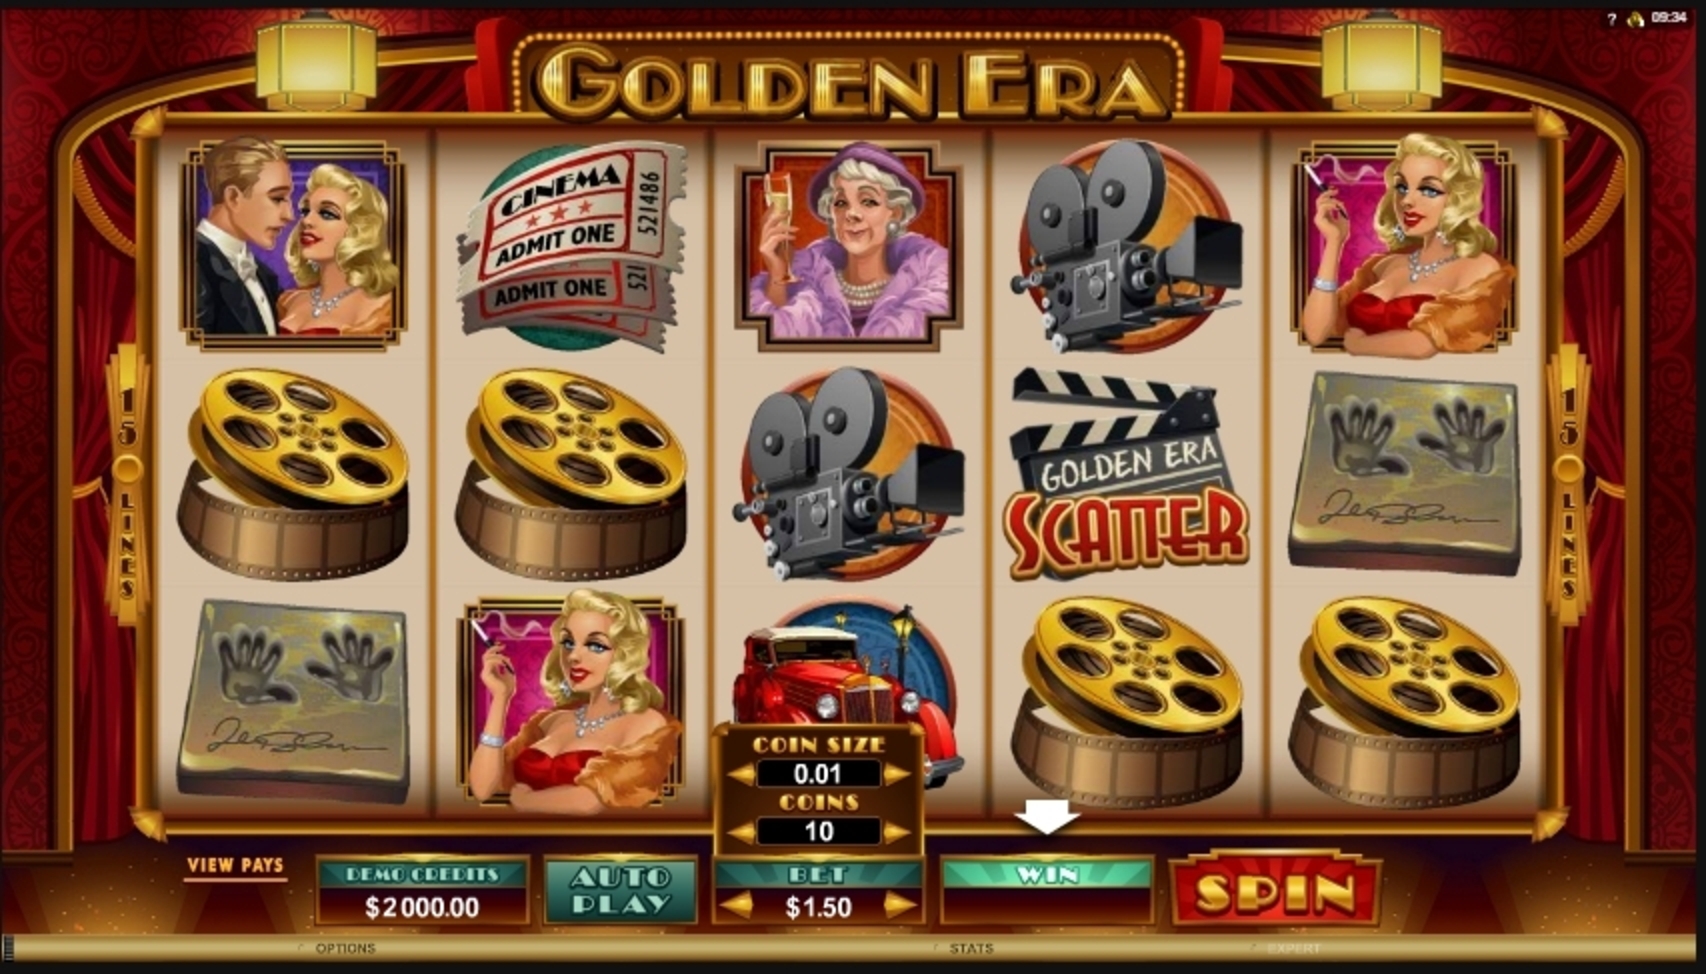 Reels in Golden Era Slot Game by Microgaming